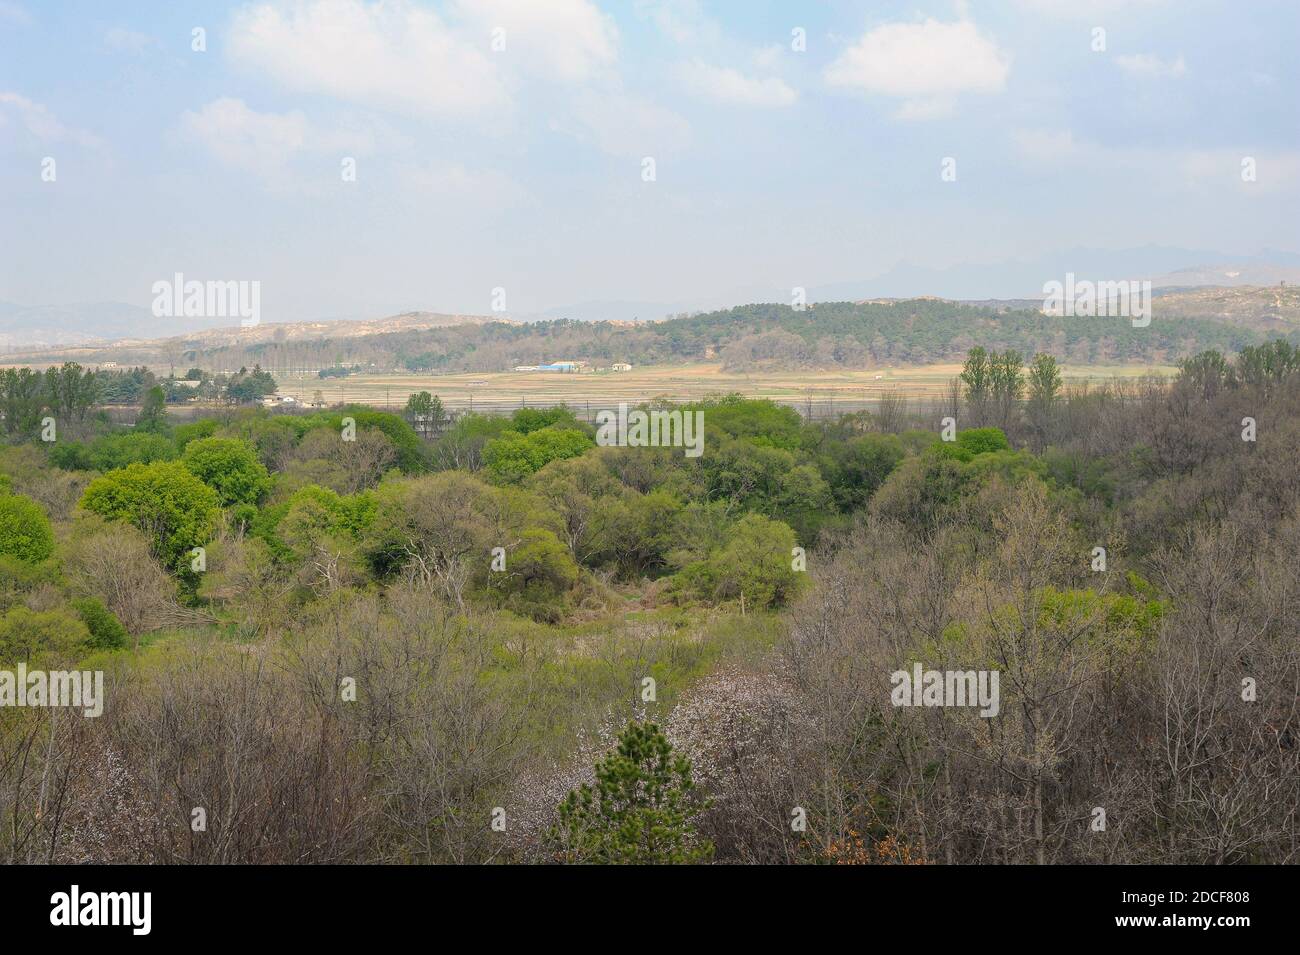 02.05.2013, Panmunjom, Korea, Asia - Looking at North Korea from South Korean side within the Demilitarized Zone (DMZ) inside the Joint Security Area. Stock Photo